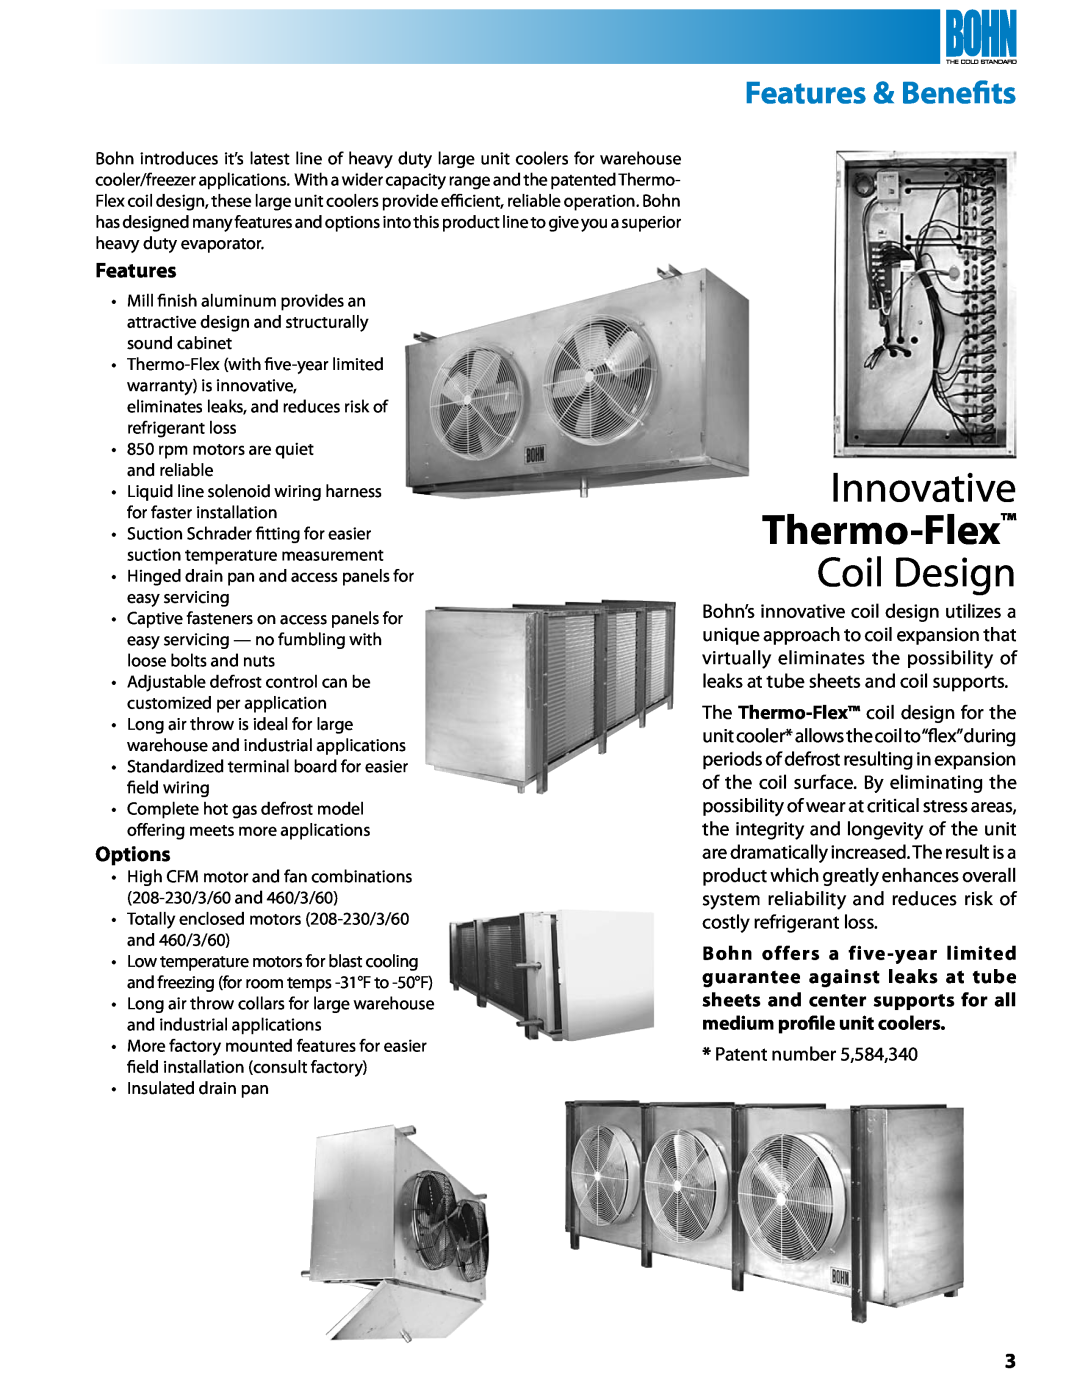 Heatcraft Refrigeration Products BHL, BHG, BHF, BHE, BHA Features & Benefits, Options, Innovative, Thermo-Flex, Coil Design 